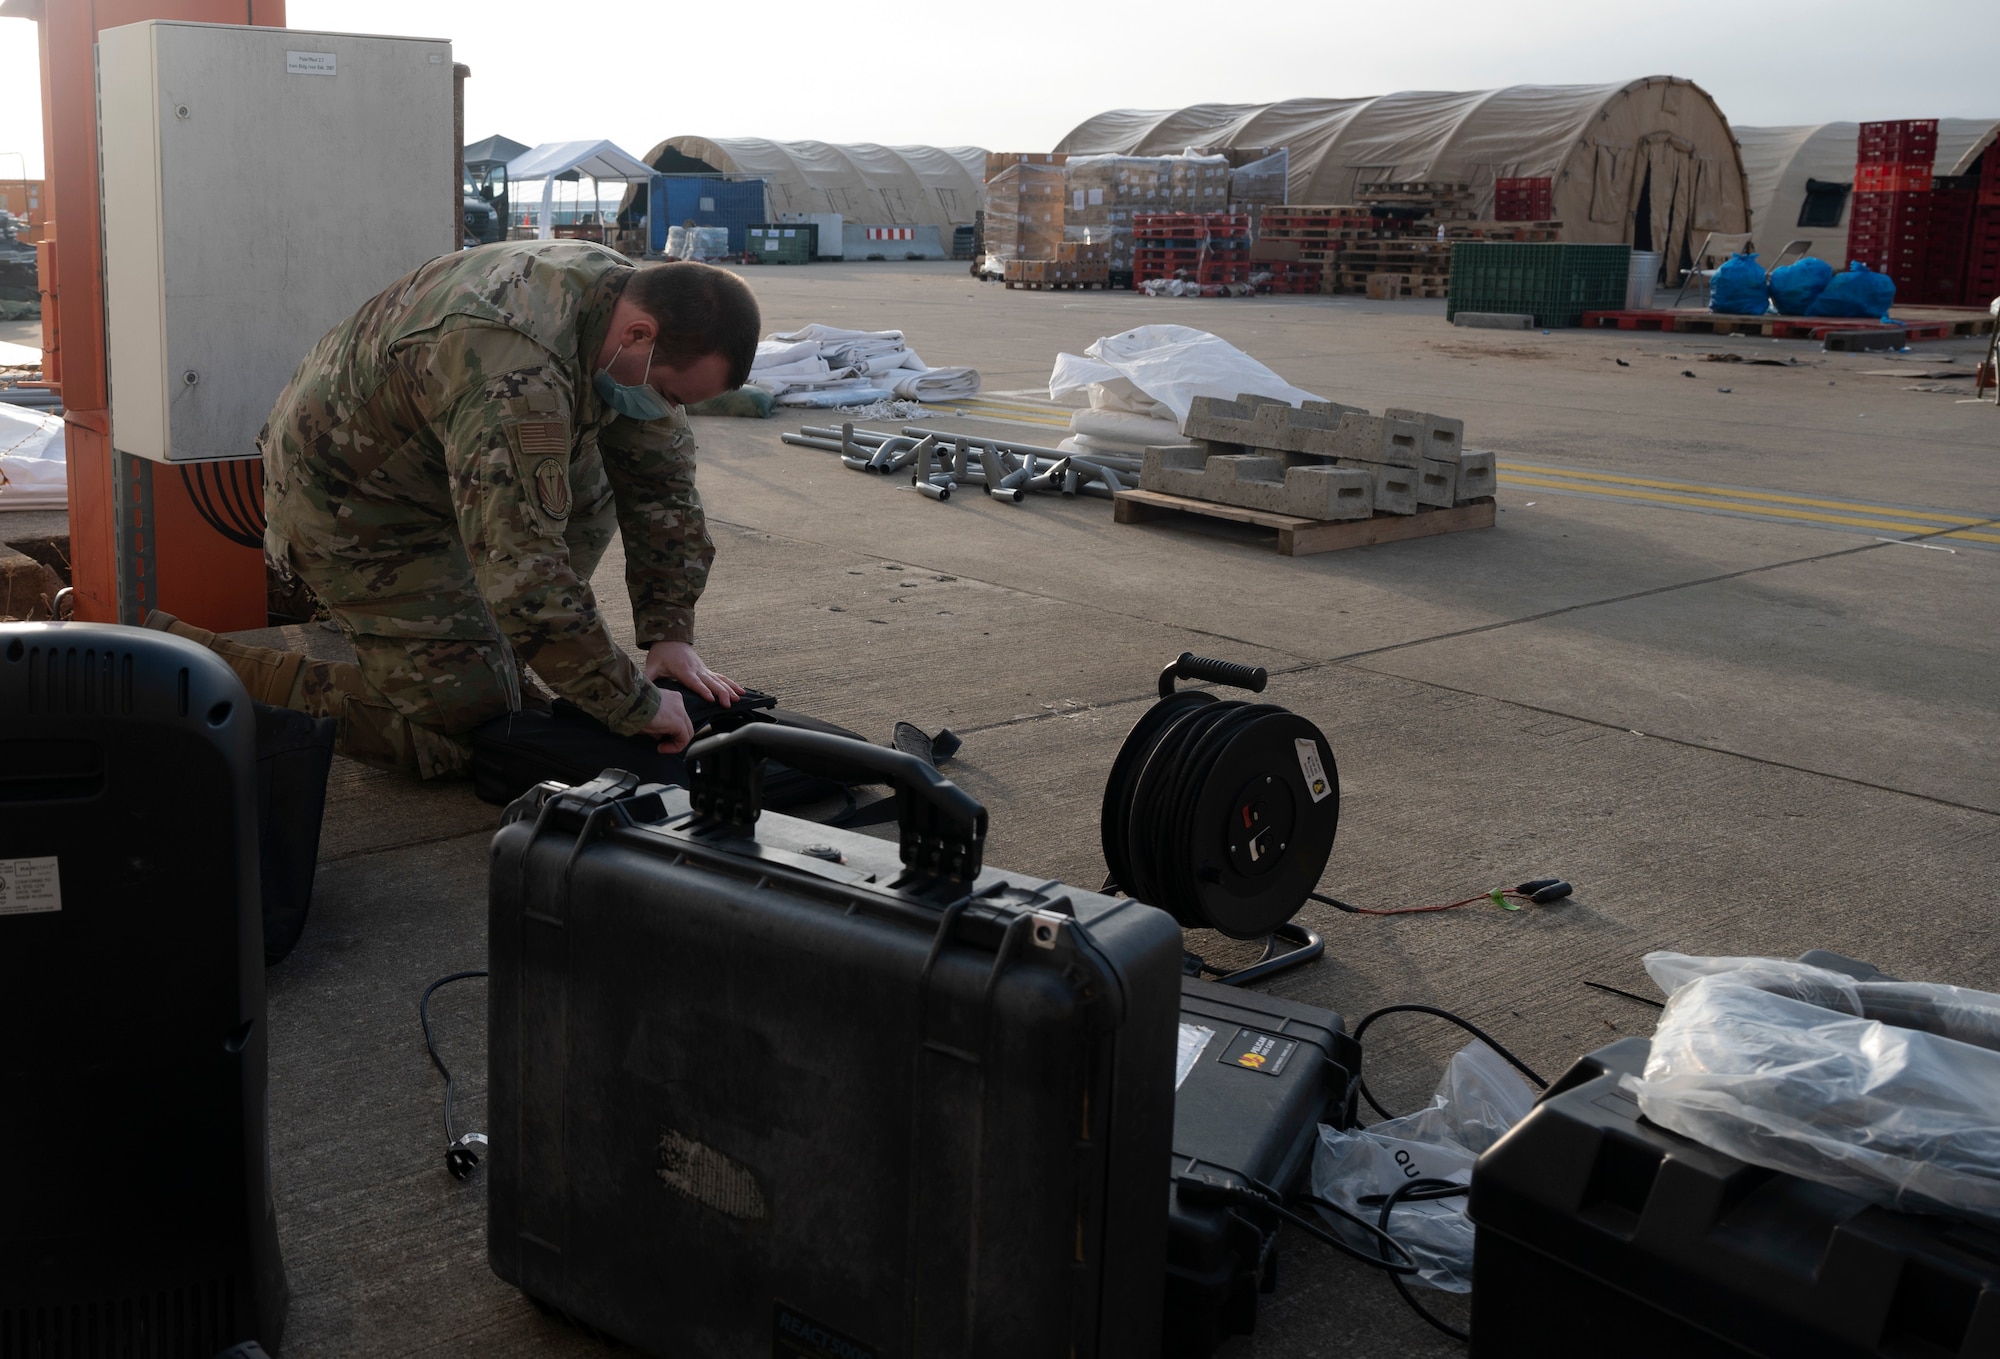 U.S. Air Force Airman 1st Class Joseph Anderson, 86th Communications Squadron radio frequency transmissions technician, packs up public announcement equipment at Ramstein Air Base, Germany, Oct. 15, 2021. U.S. service members and partners removed military equipment while contractors deconstructed tents and remove remaining equipment. (U.S. Air Force photo by Senior Airman Thomas Karol)